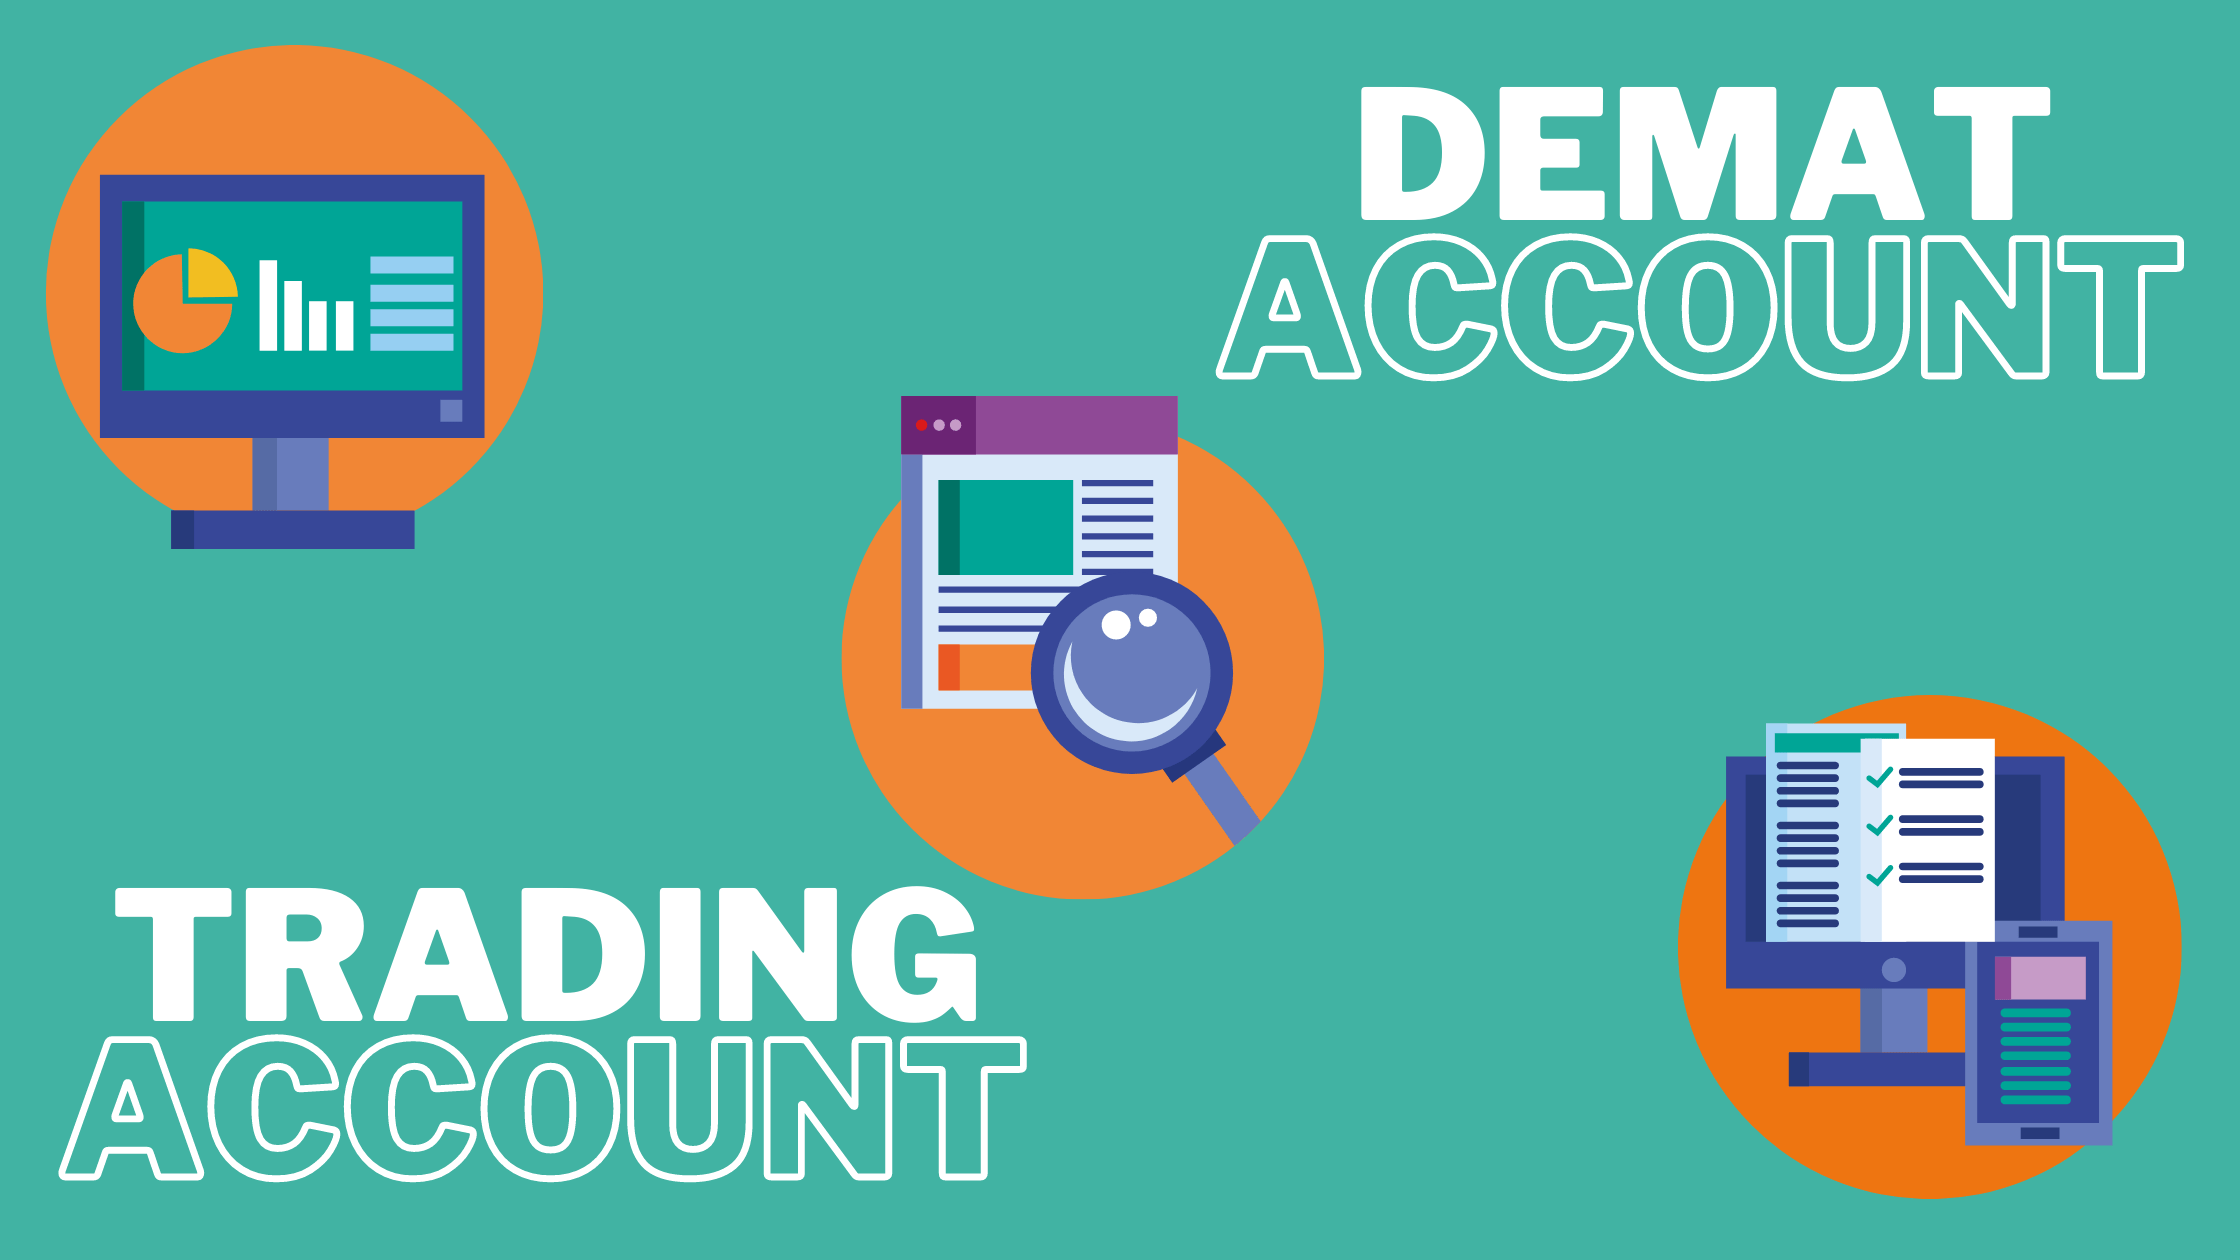 Key Features to look into a Demat Account Trading Account